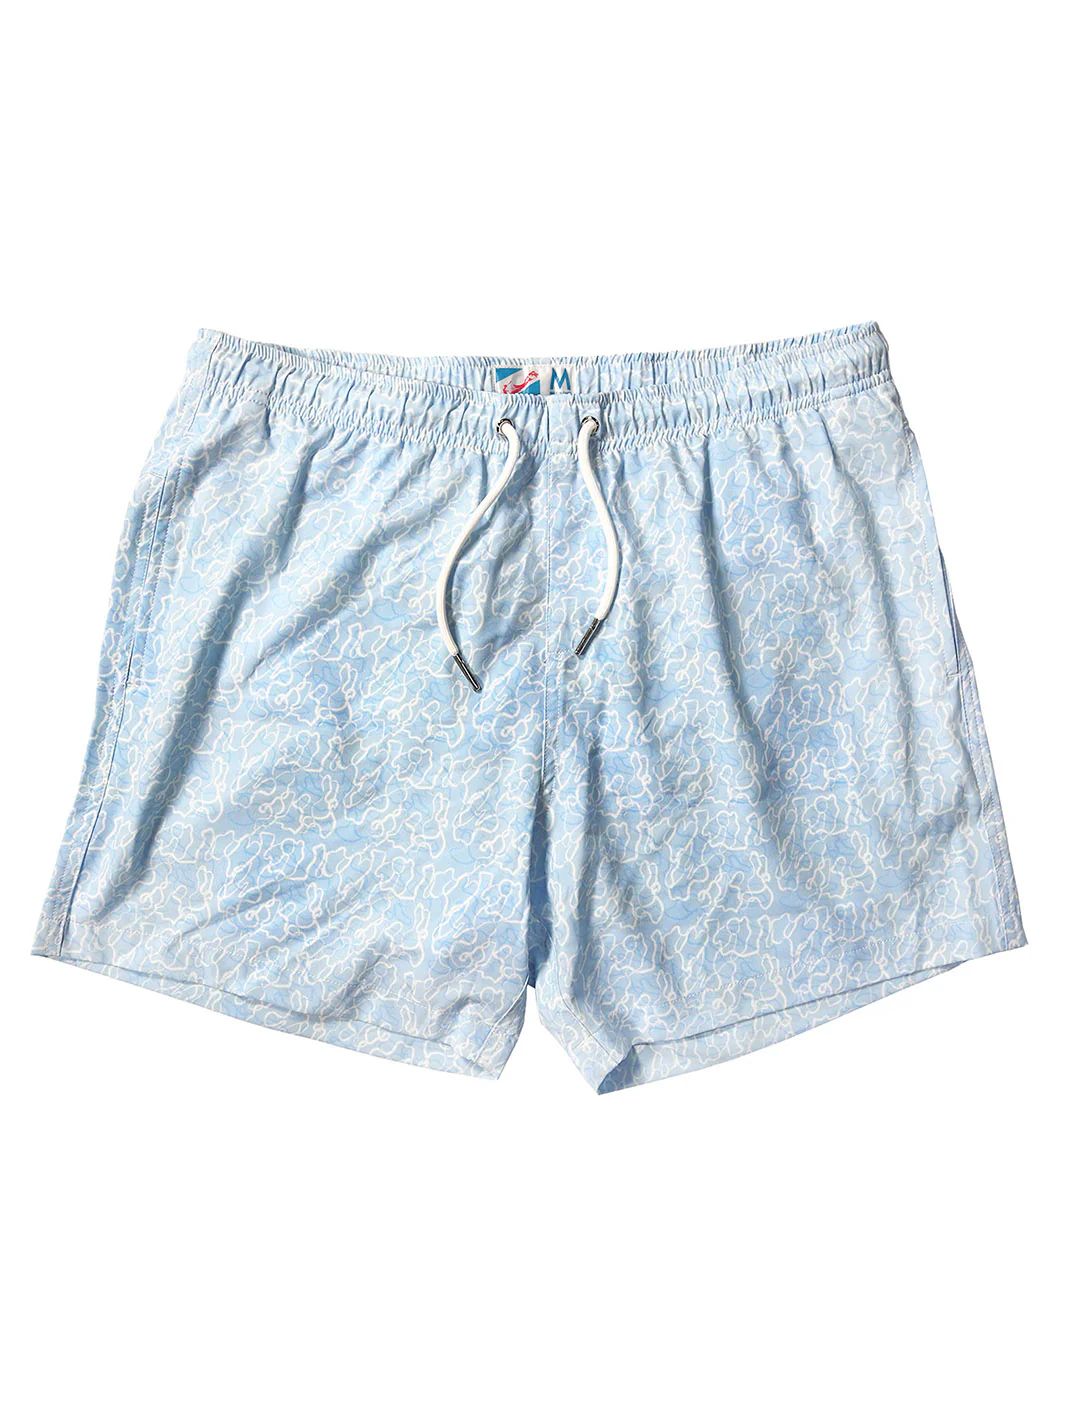 Bermies Men's Ocean Motion Cropped Swim Trunks in Blue Large Lord & Taylor | Lord & Taylor